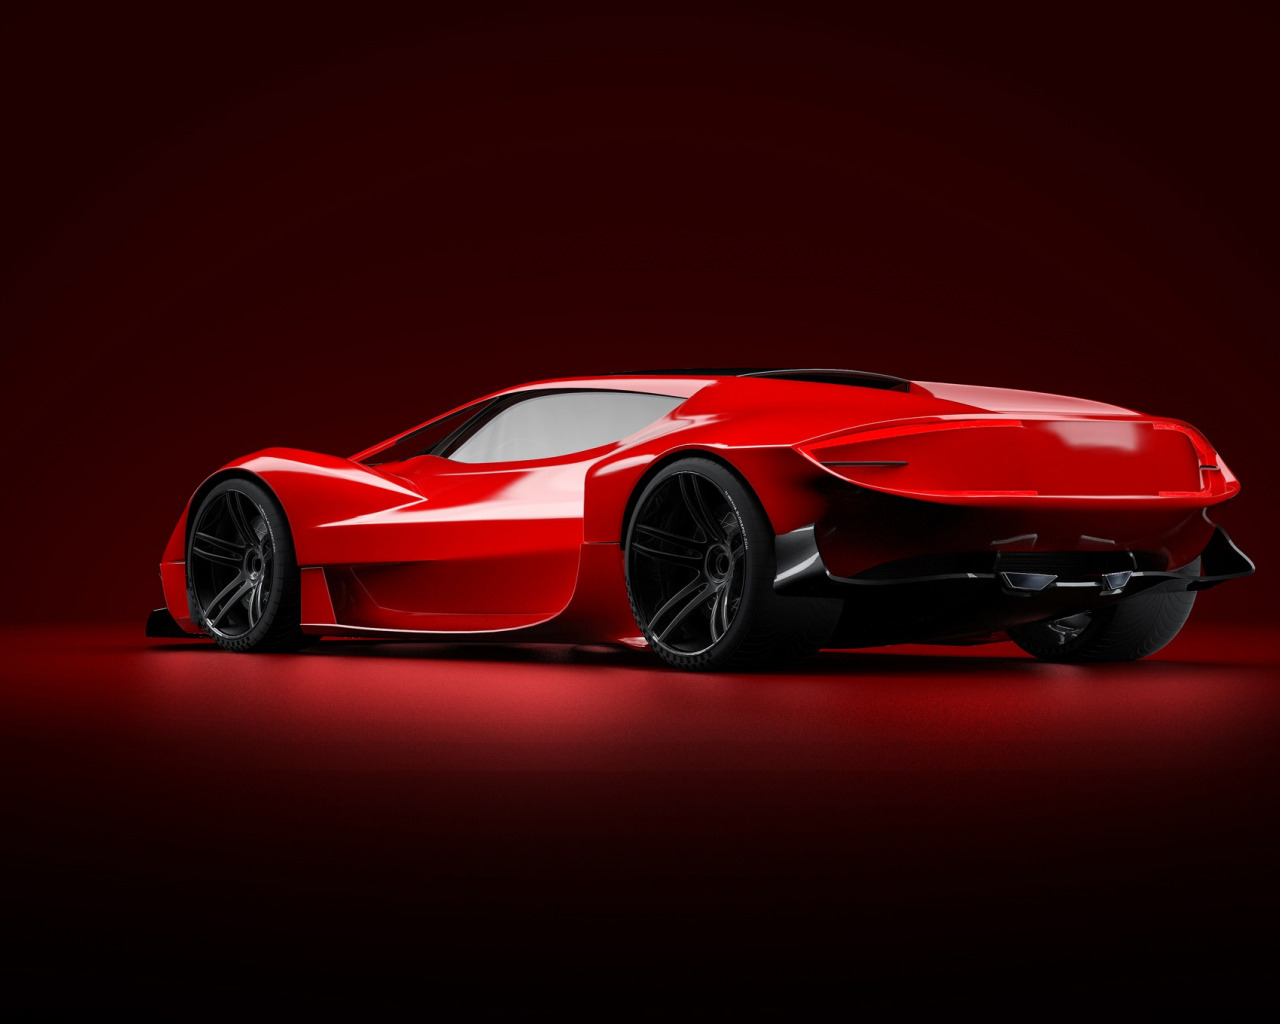 Download wallpaper Red, Machine, Style, Background, Red, Car, Art, Render, Design, Supercar, Supercar, Sports car, Sportcar, Transport & Vehicles, November Tlibekov, by Kasim Tlibekov, section rendering in resolution 1280x1024